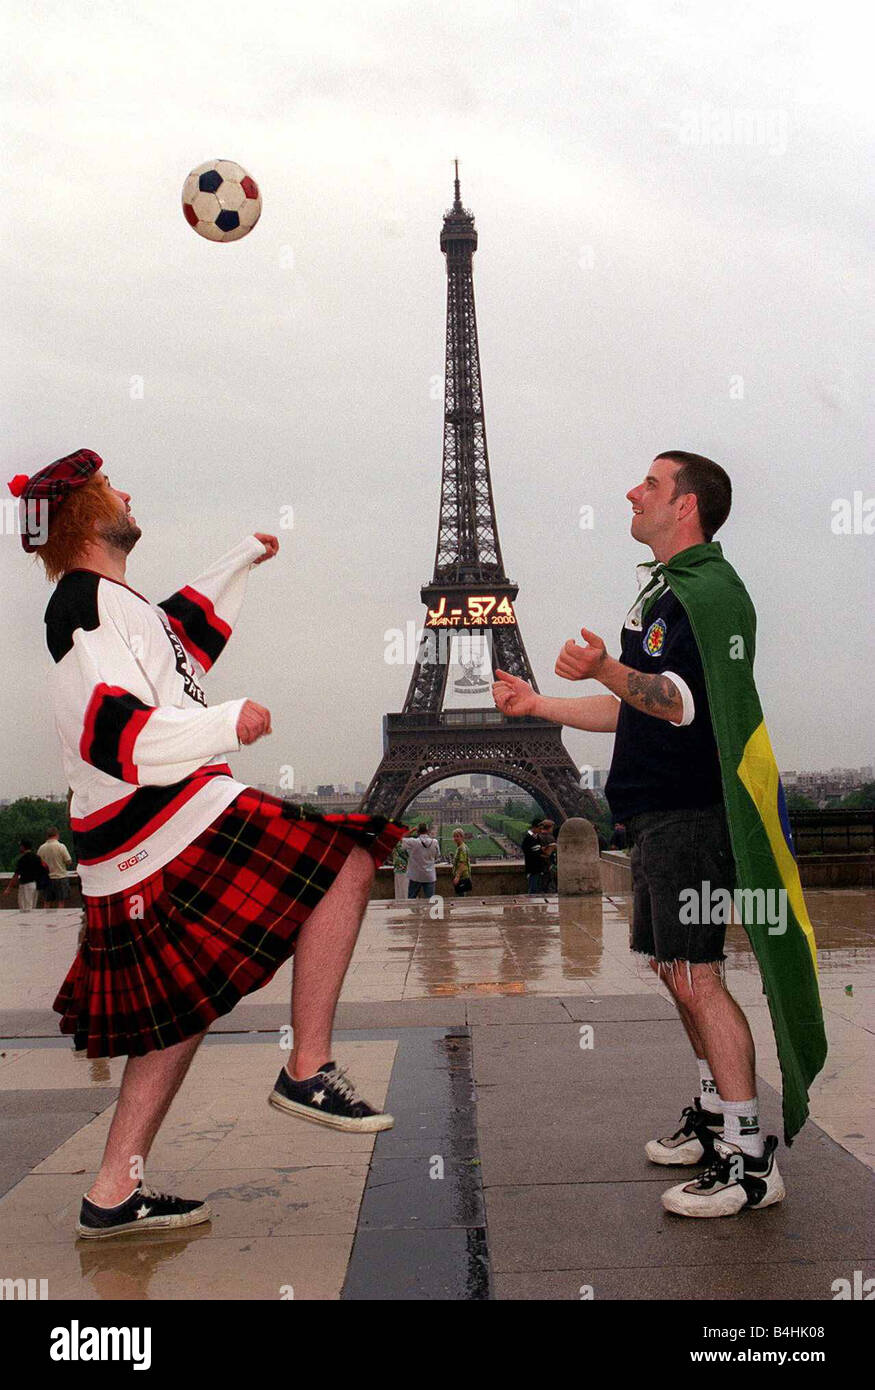 World Cup France June 1998 Football Scotland fans Richey Kenna & George Smith in Paris playing with ball in rain at Eiffel Tower Stock Photo